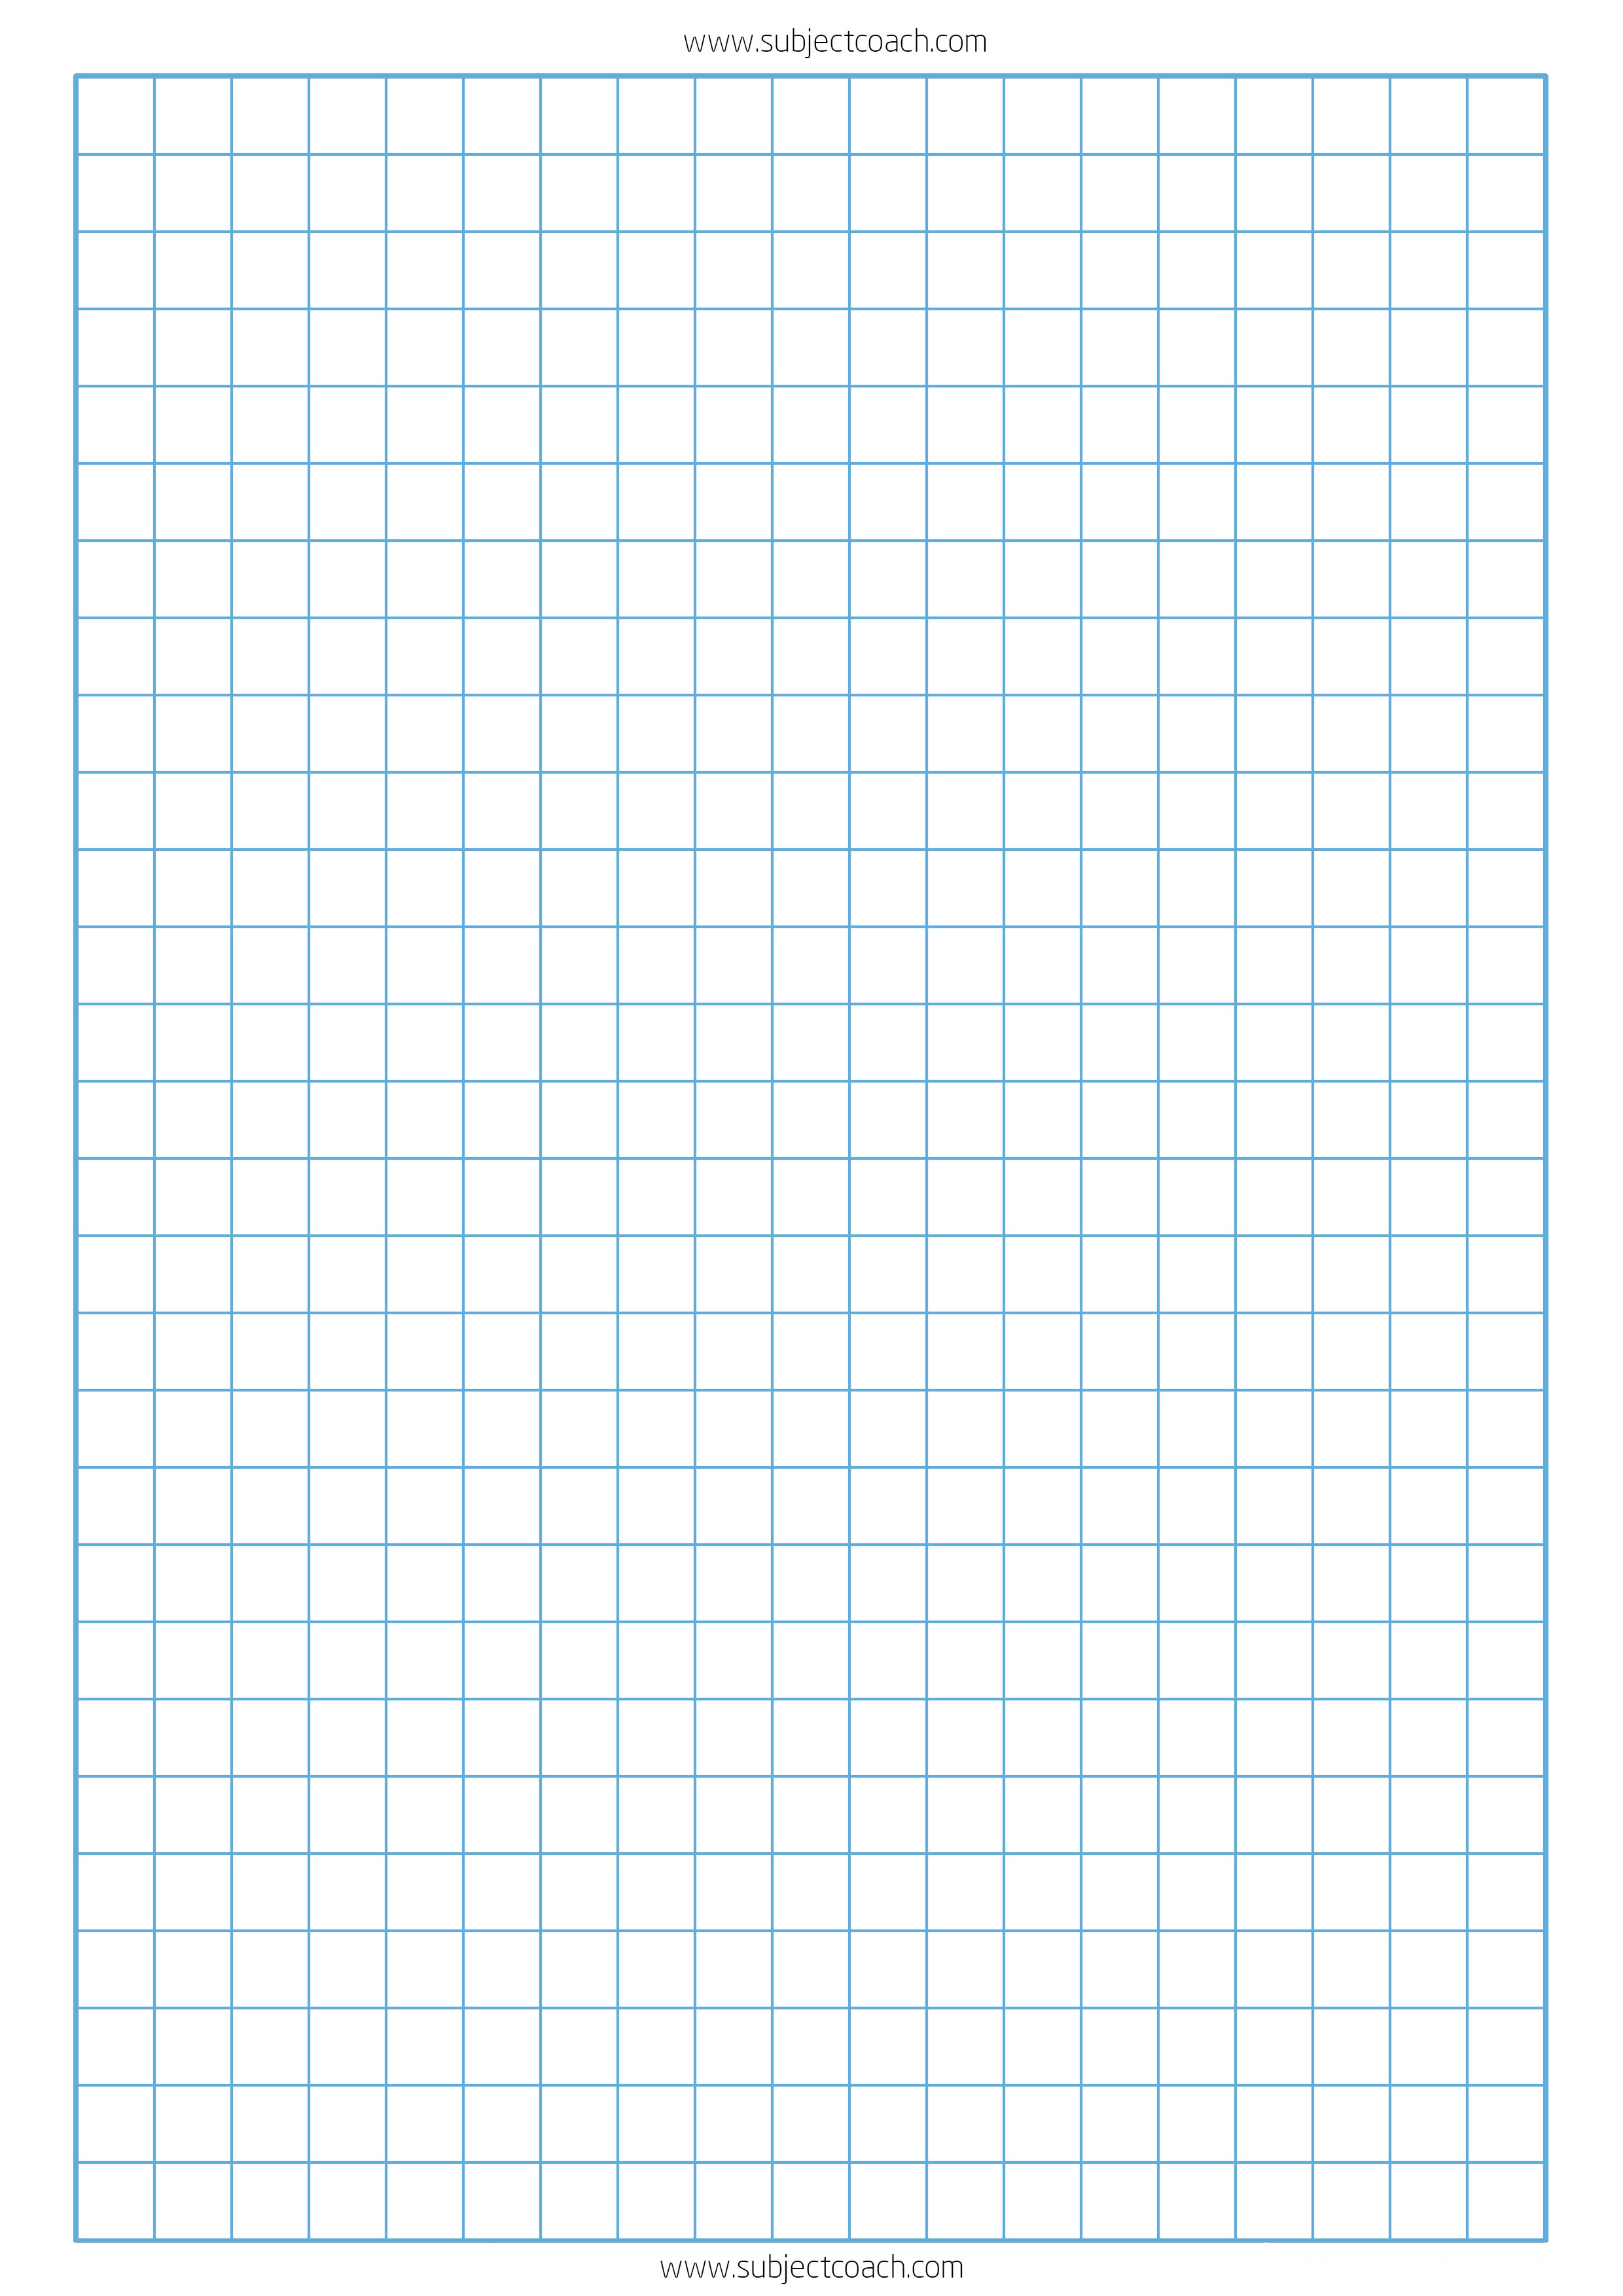 graphing-paper-printable-a4-printable-world-holiday